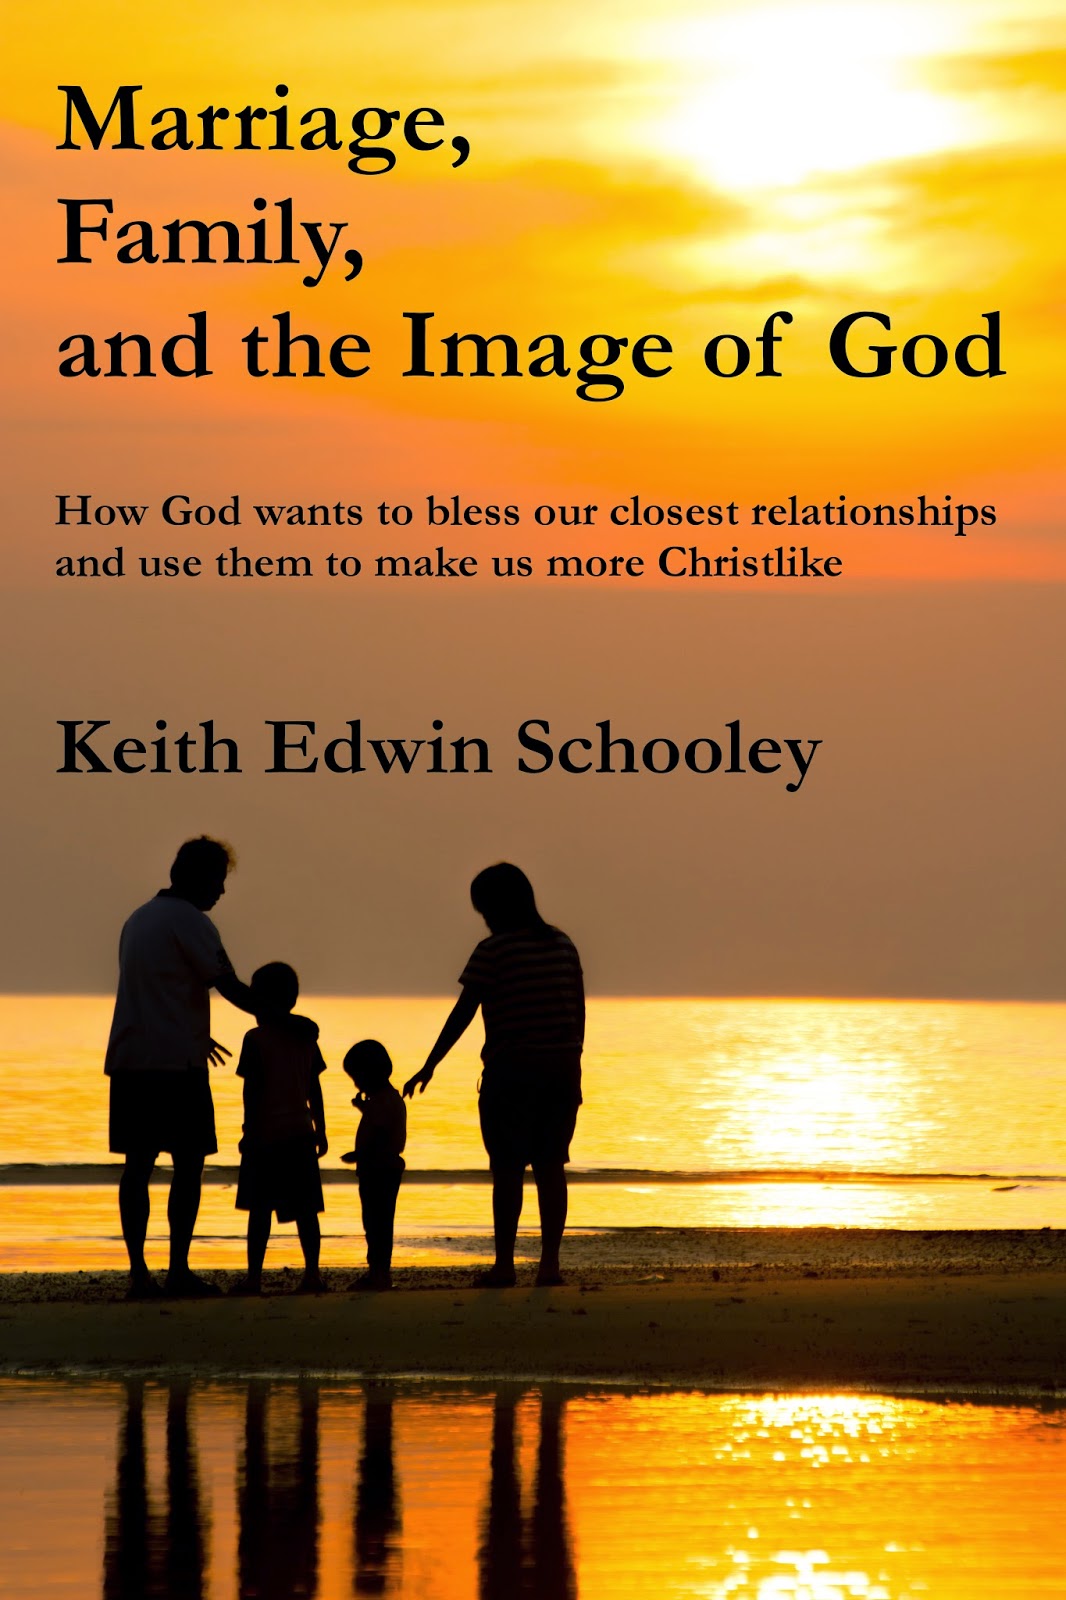 Marriage, Family, and the Image of God